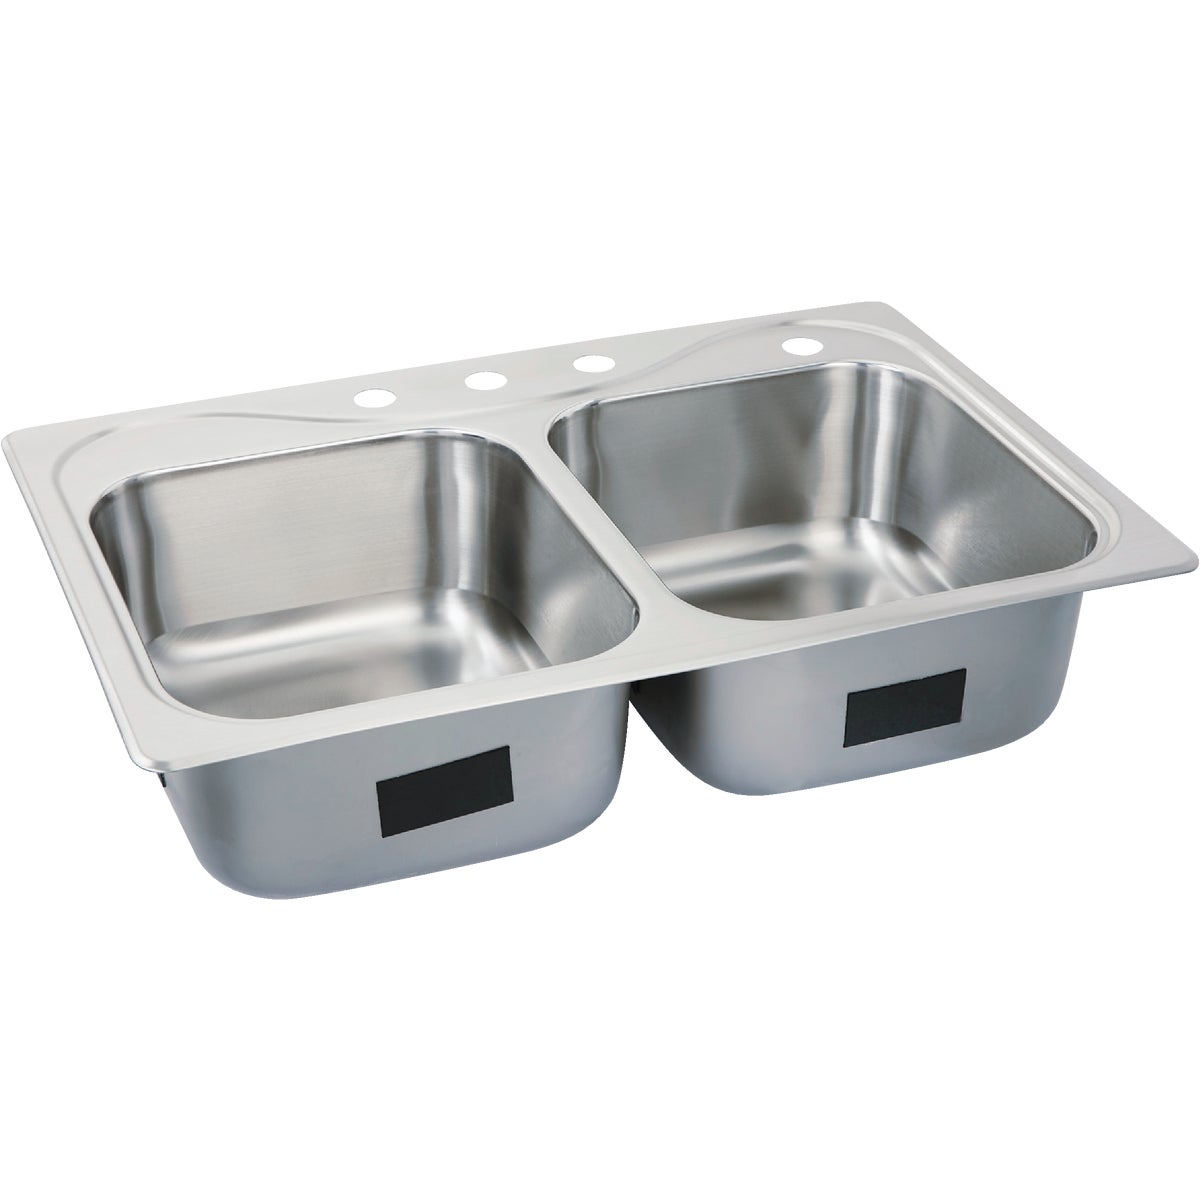 Item 403343, Southhaven double bowl self-rimming kitchen sink.